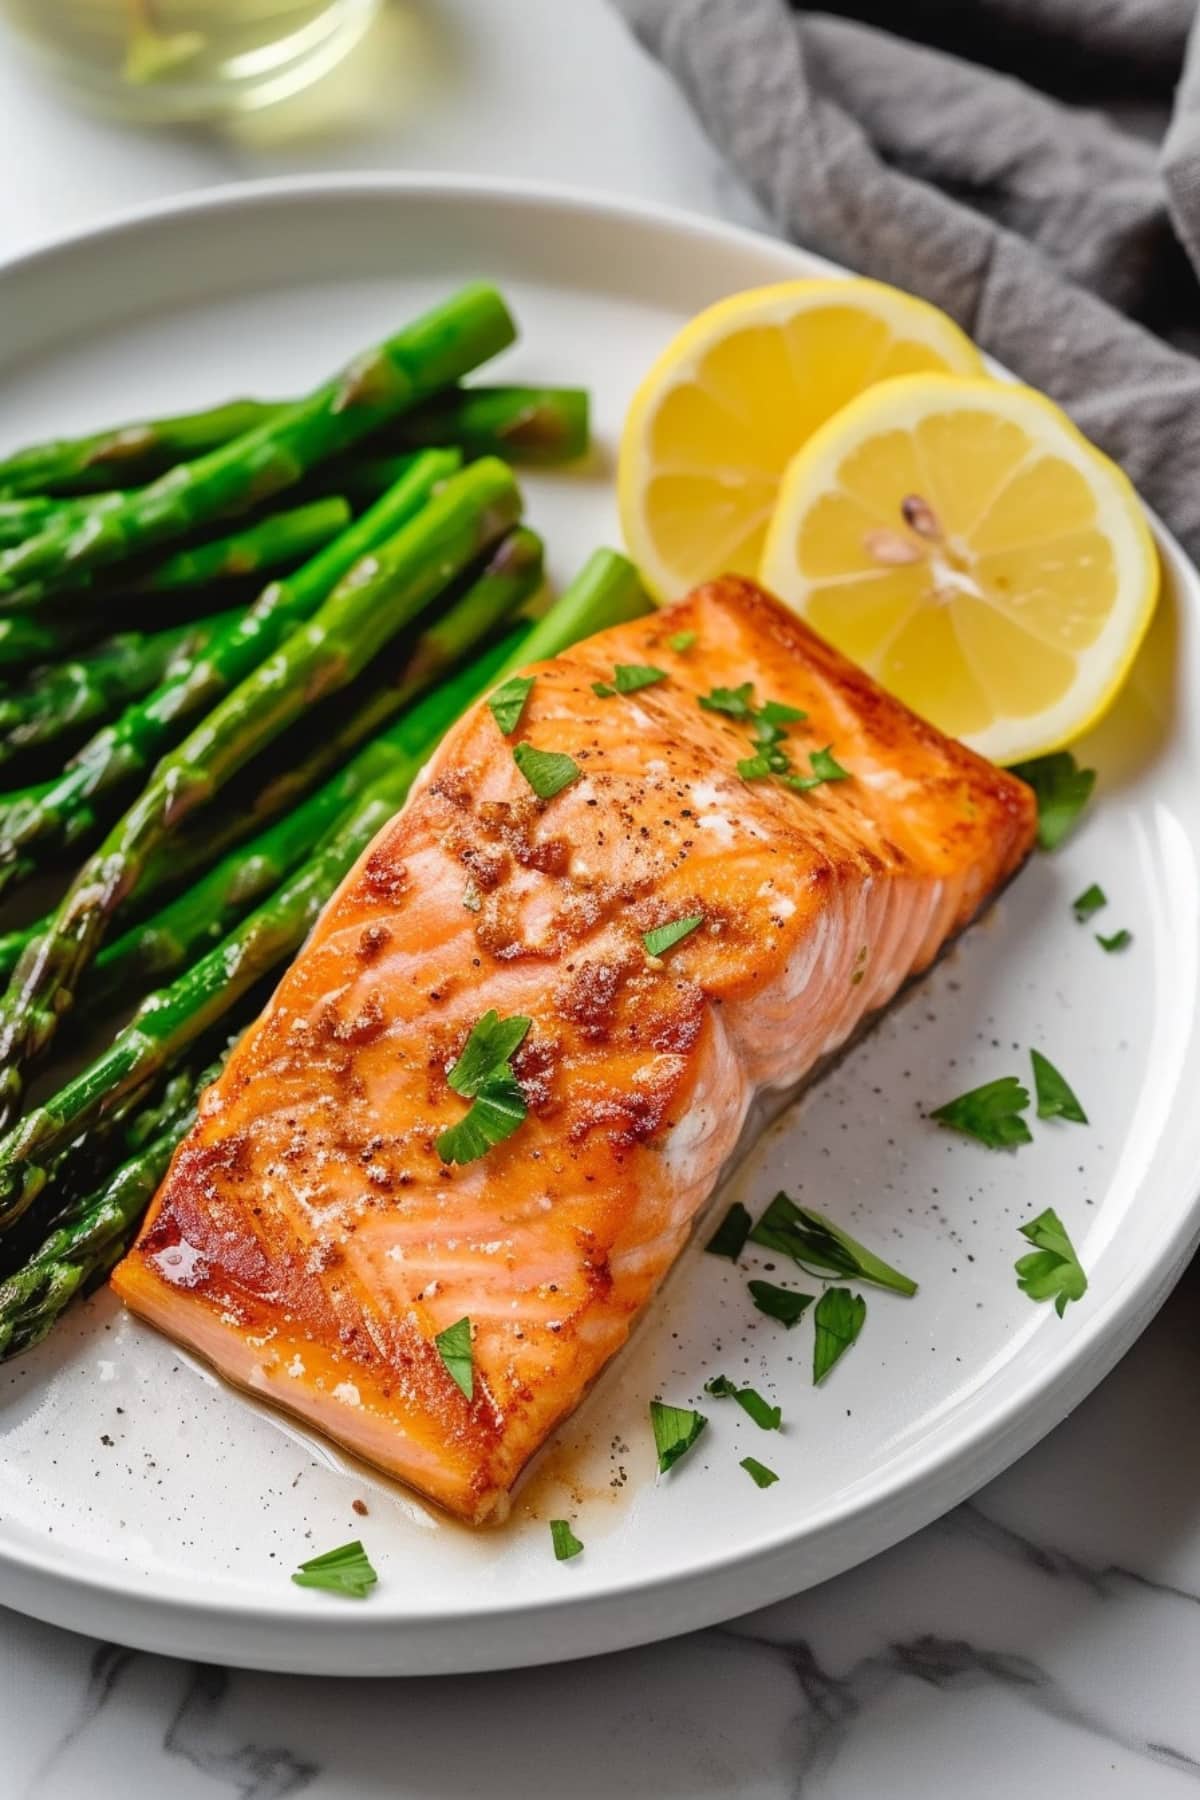 Homemade juicy salmon fillet served with asparagus and lemon slices